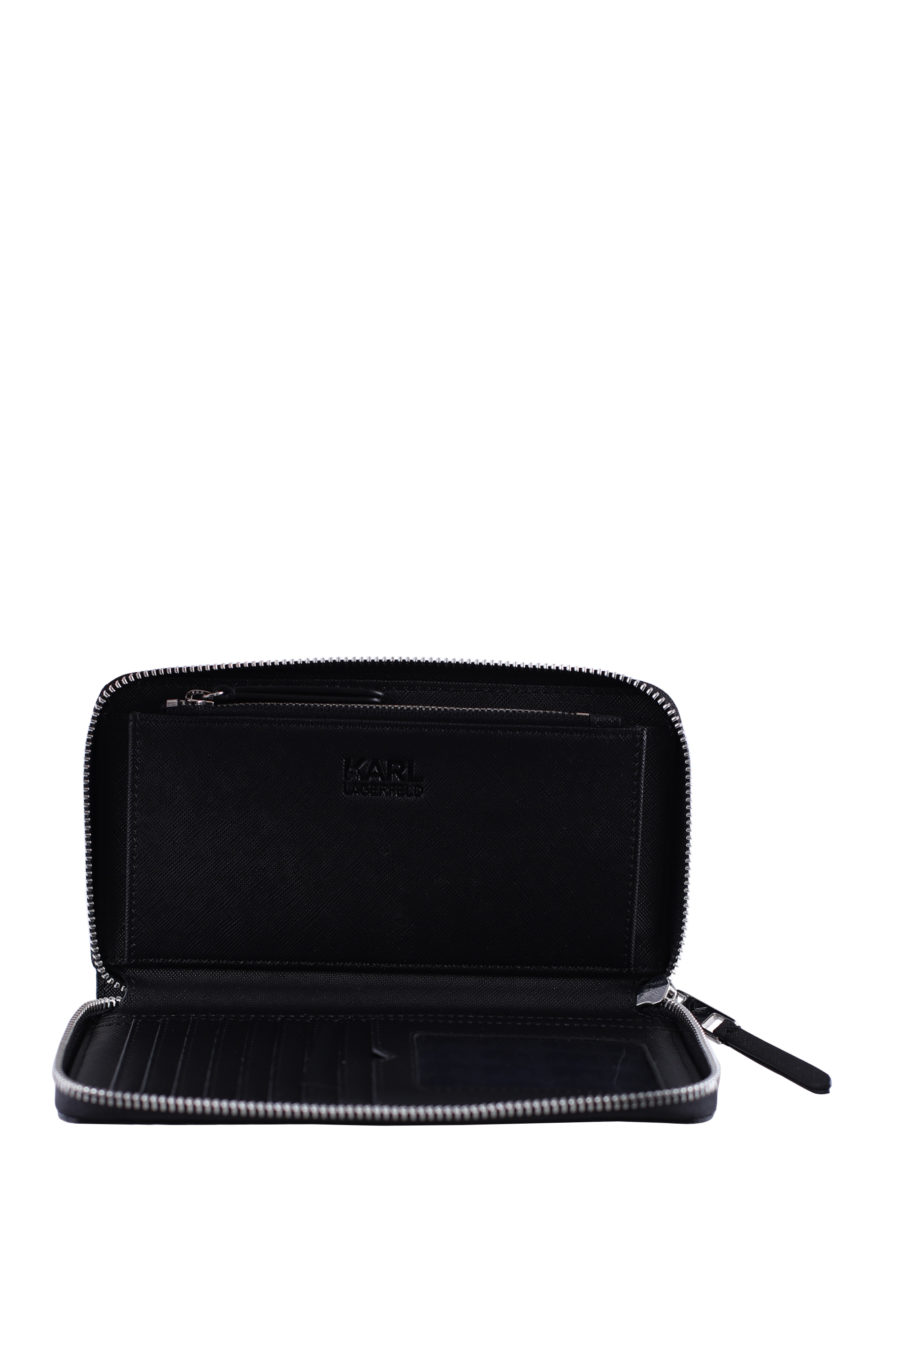 Black zipped wallet with brand logo - IMG 0033